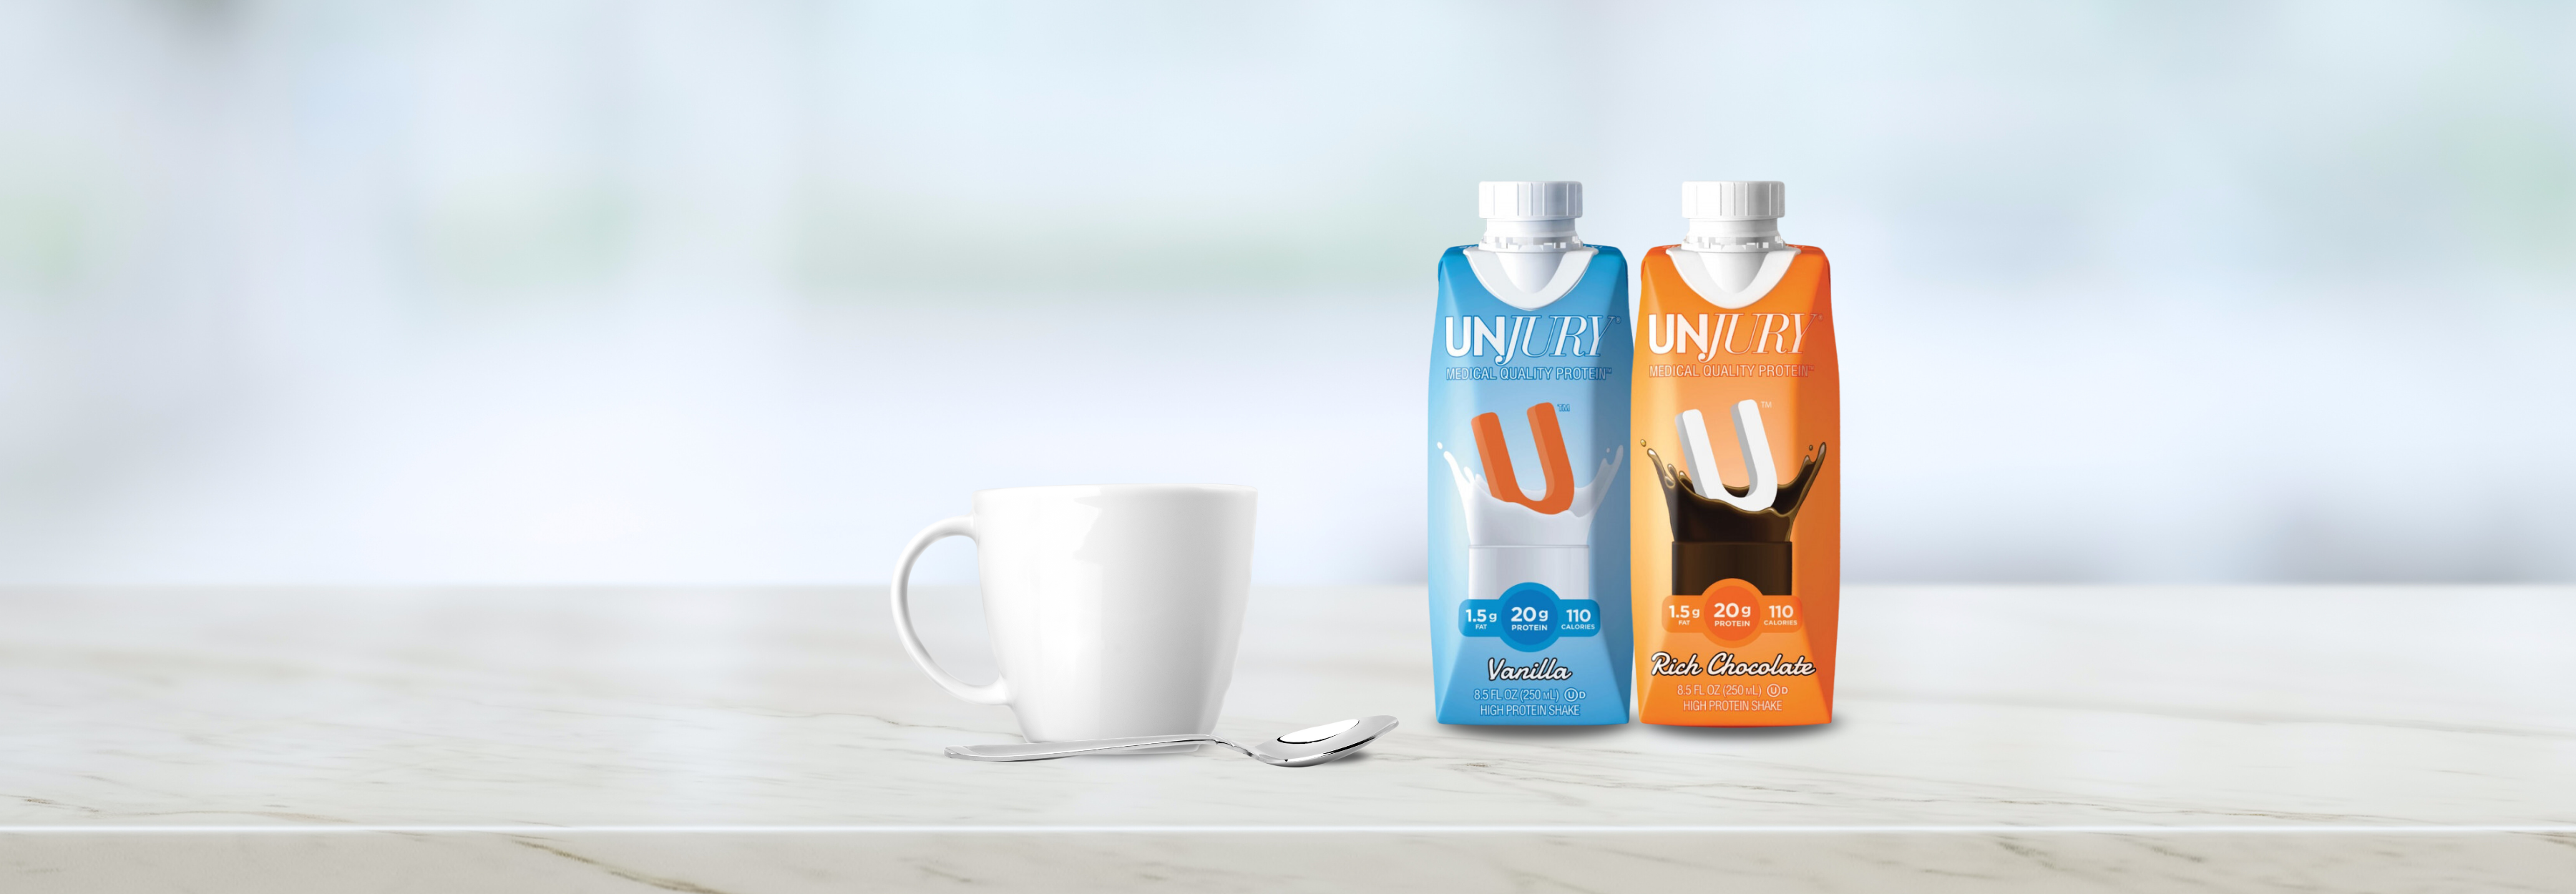 Unjury Ready-to-Drink Medical Quality Protein Shakes